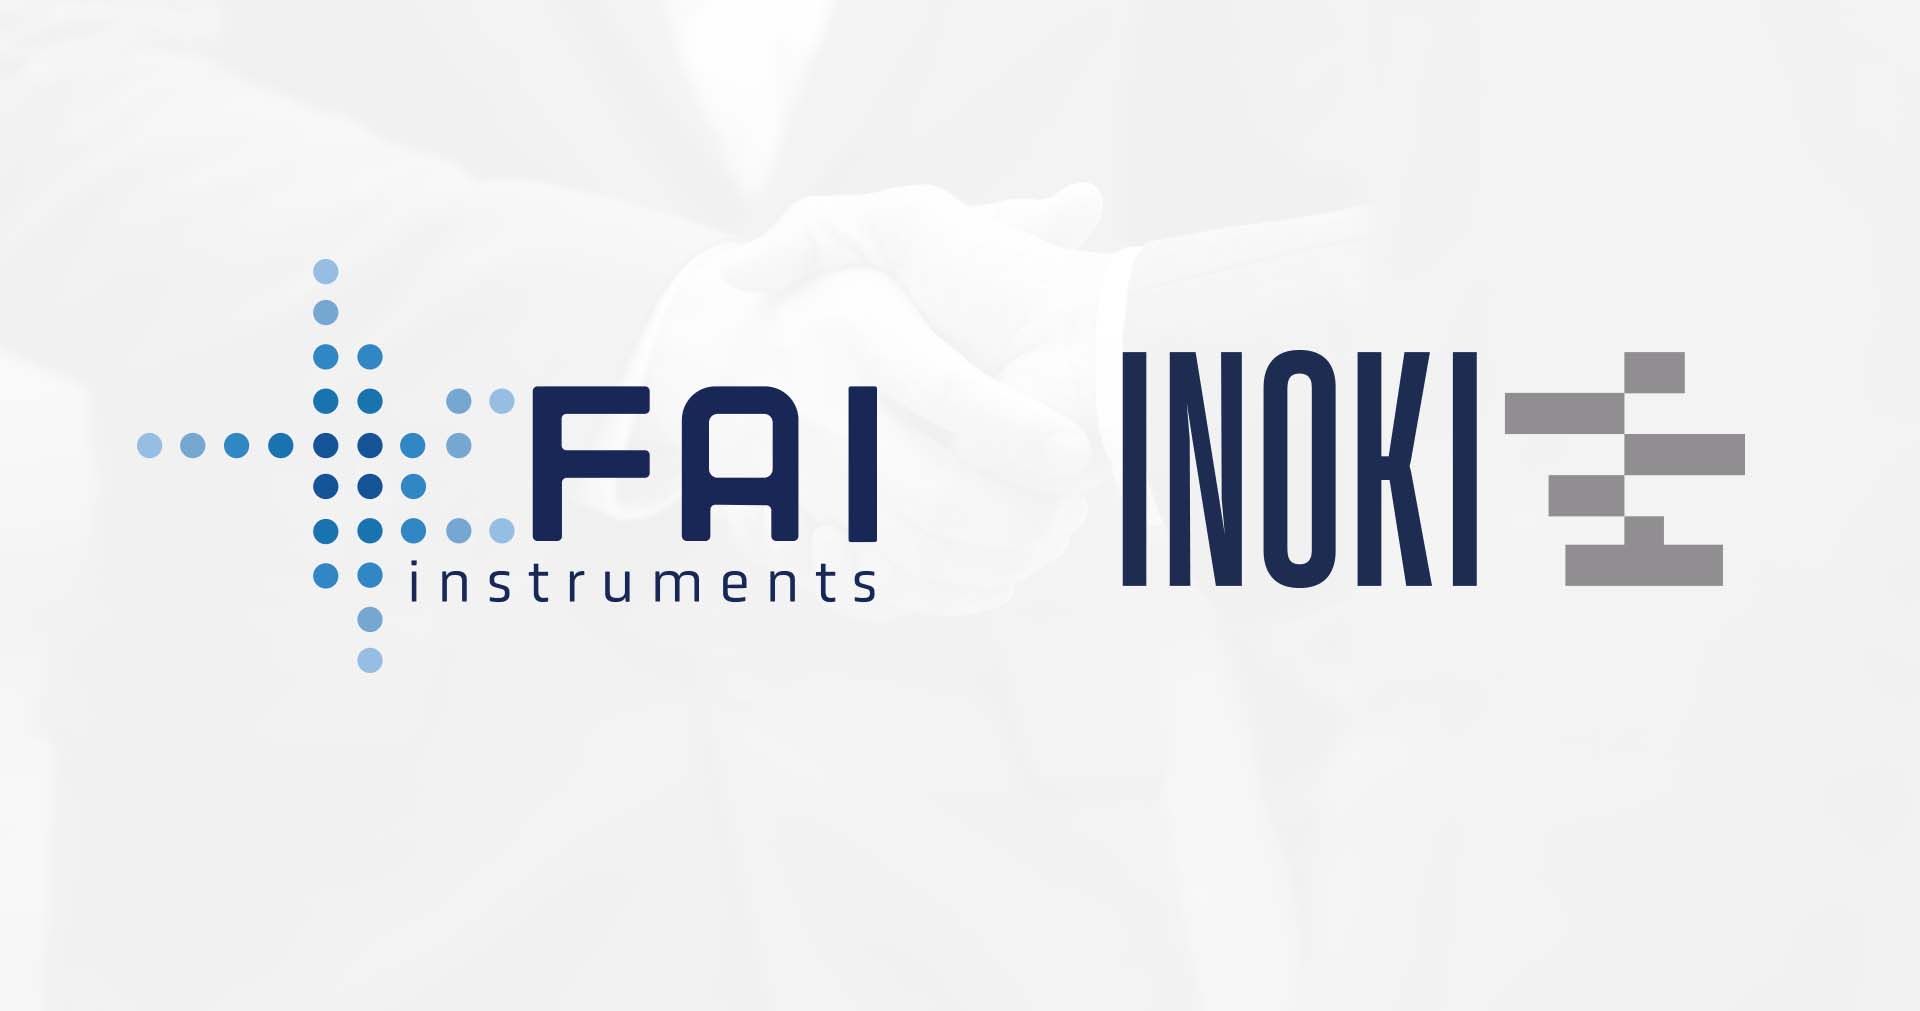 Rigel Announces Completion of Fai Instruments and Inoki Acquisition